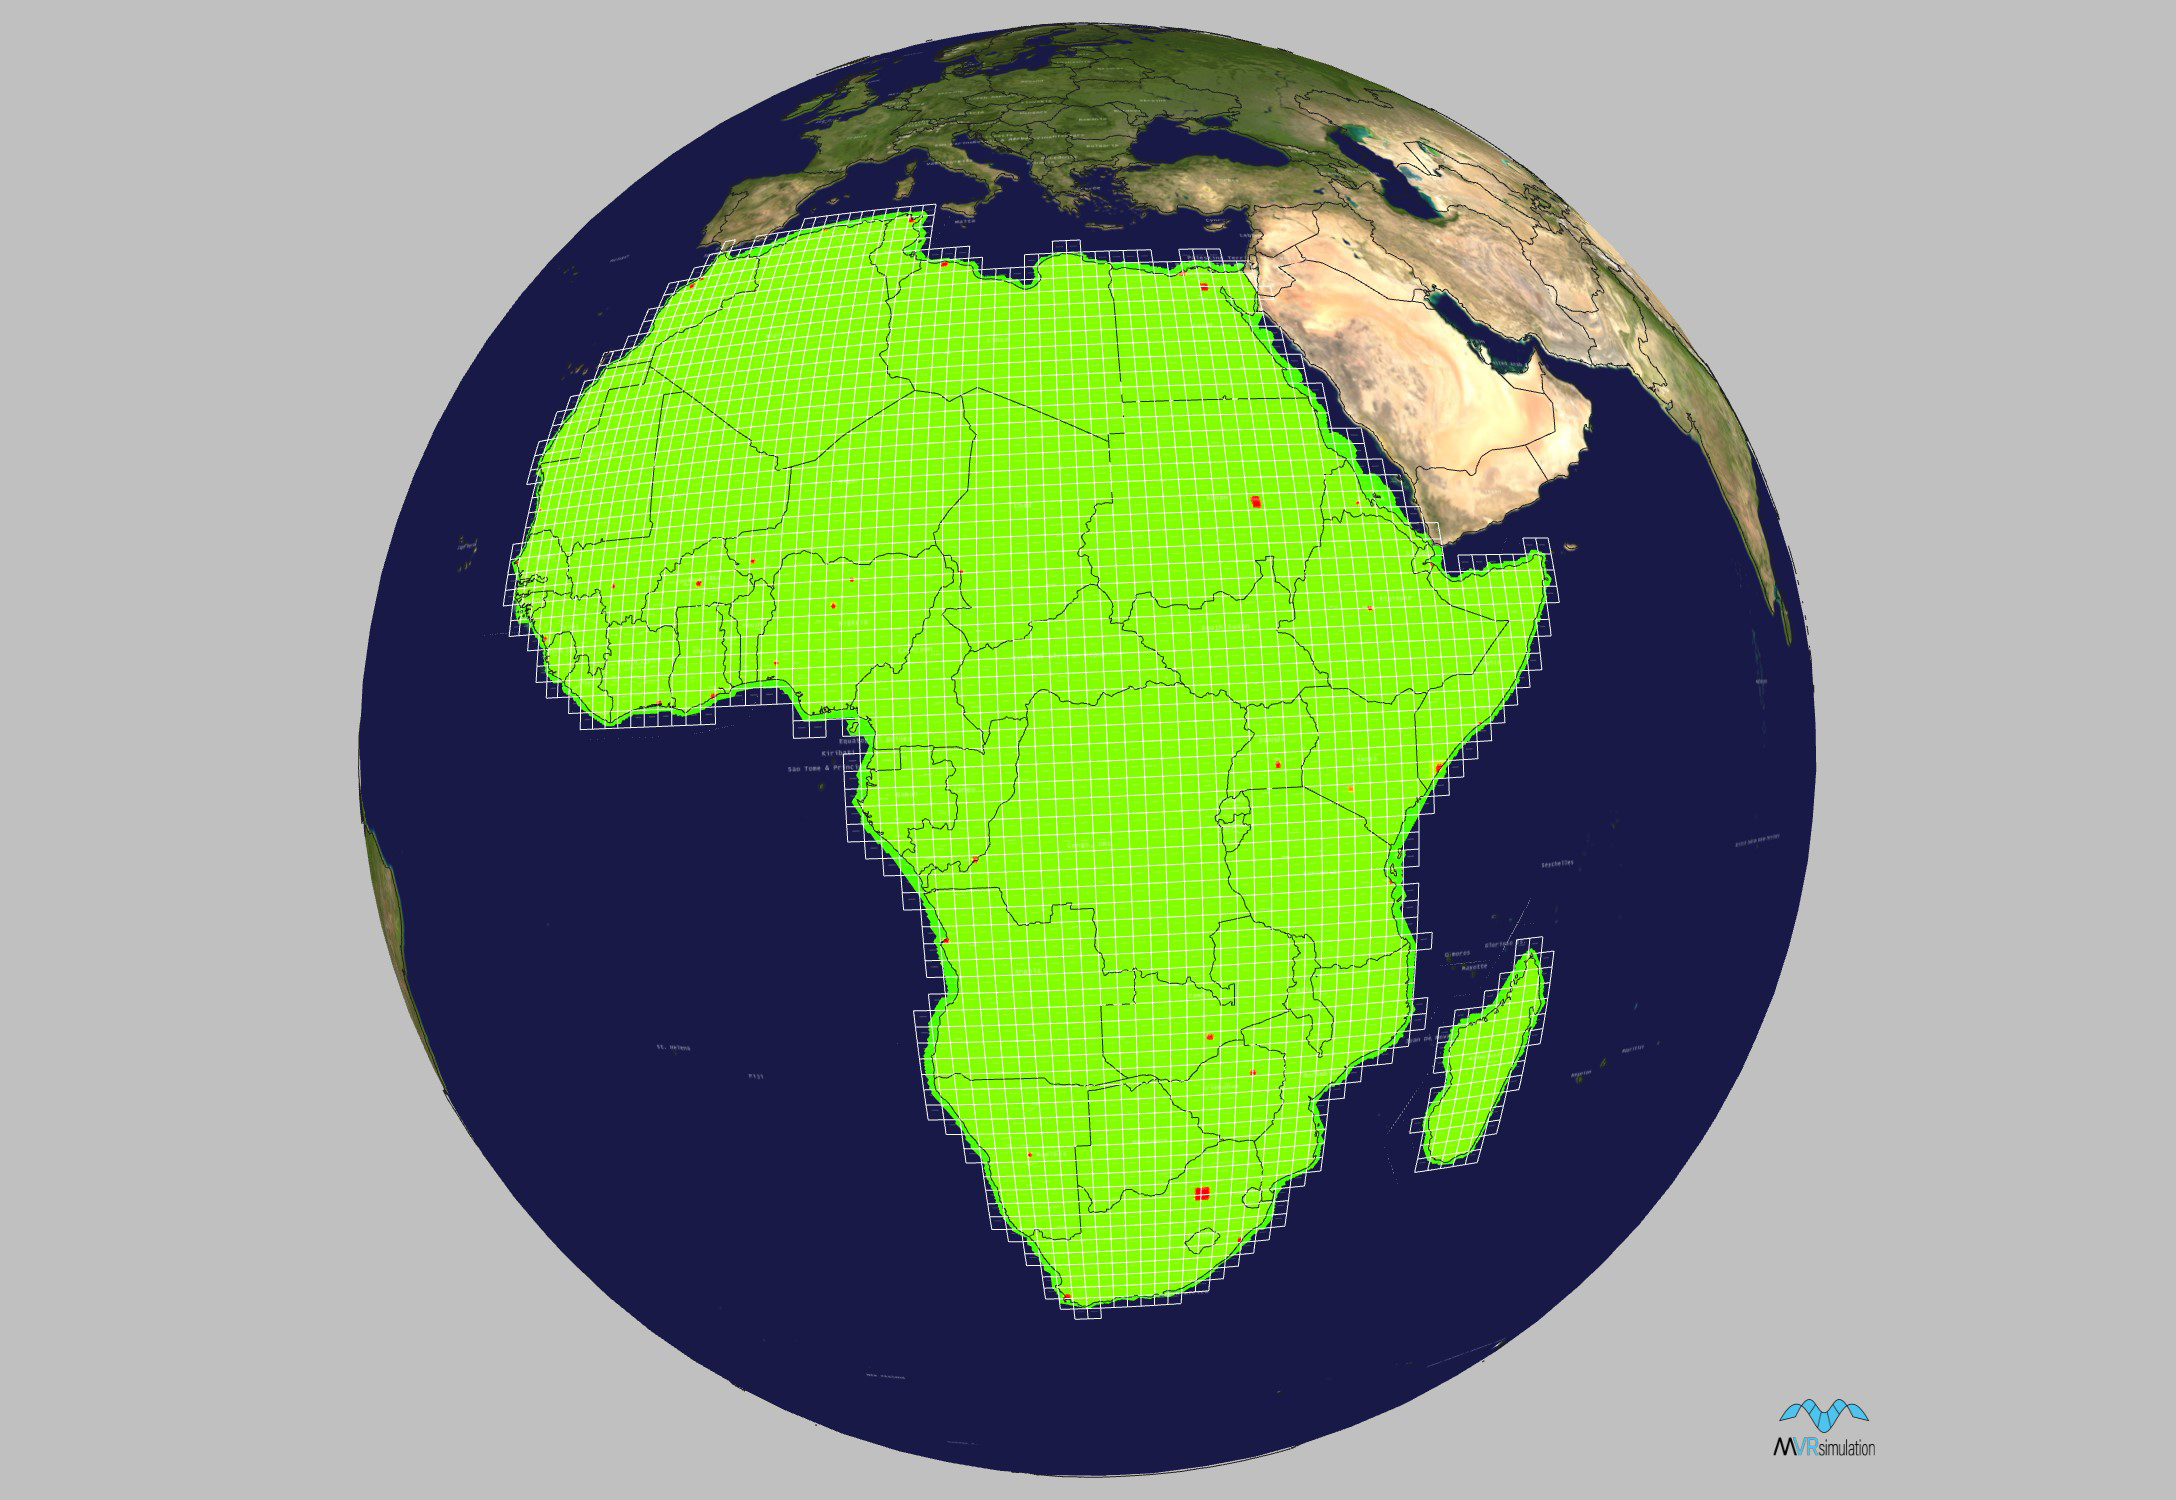 Geographic coverage of MetaVR's terrain tiles of Africa.